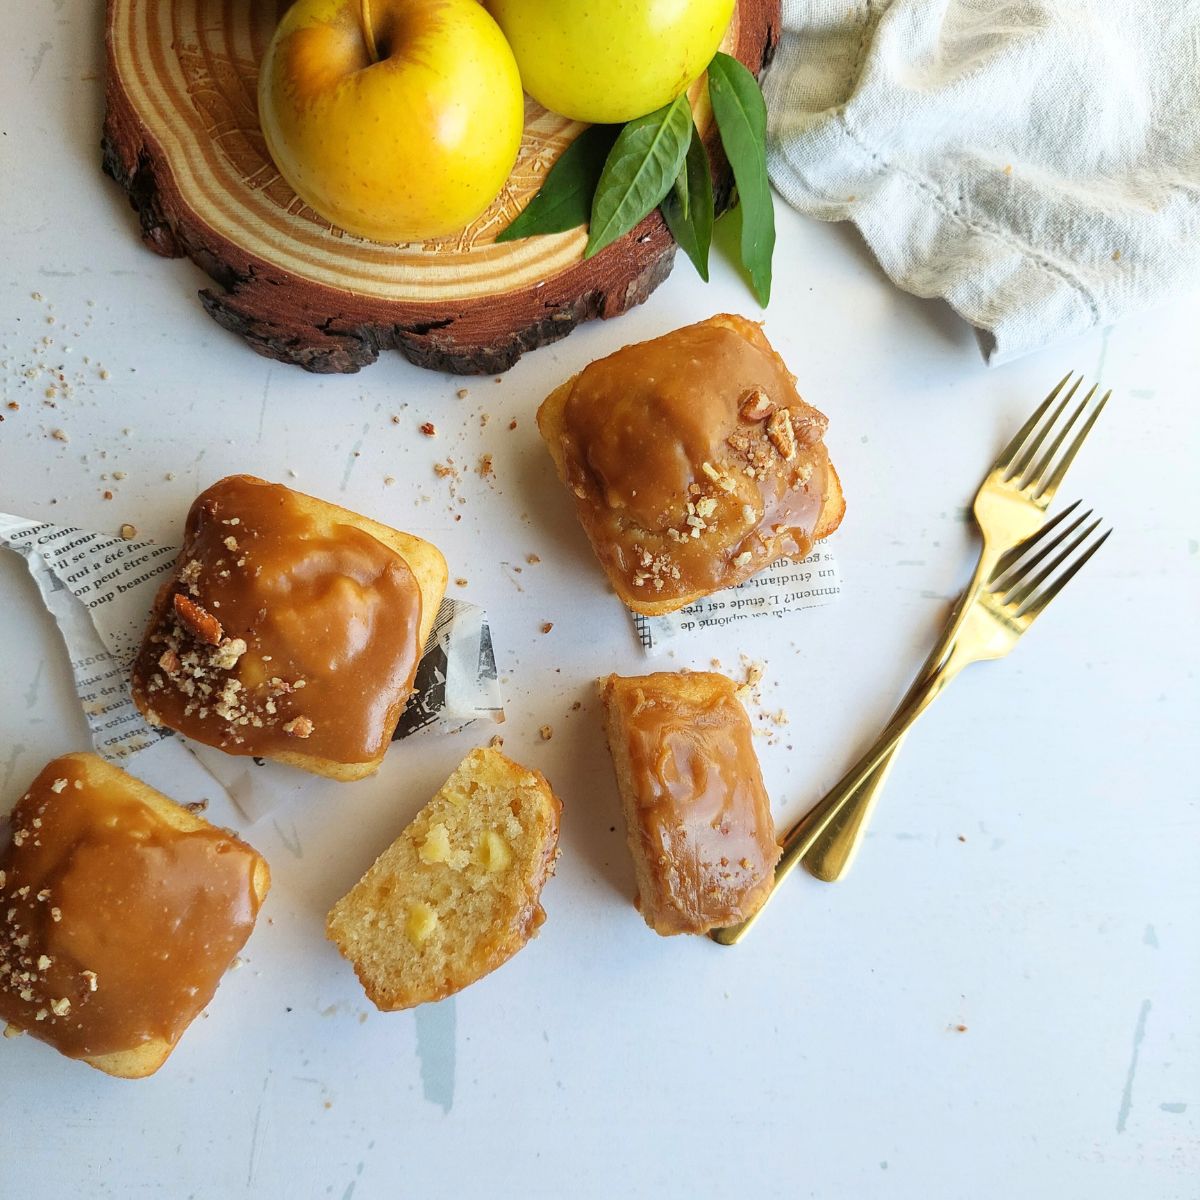 Apple snack cakes -for a sweeter treat, frost with a simple caramel glaze, made from brown sugar and heavy cream. Made in under 10 minutes, it's so much simpler to make than classic caramel but just as tasty.